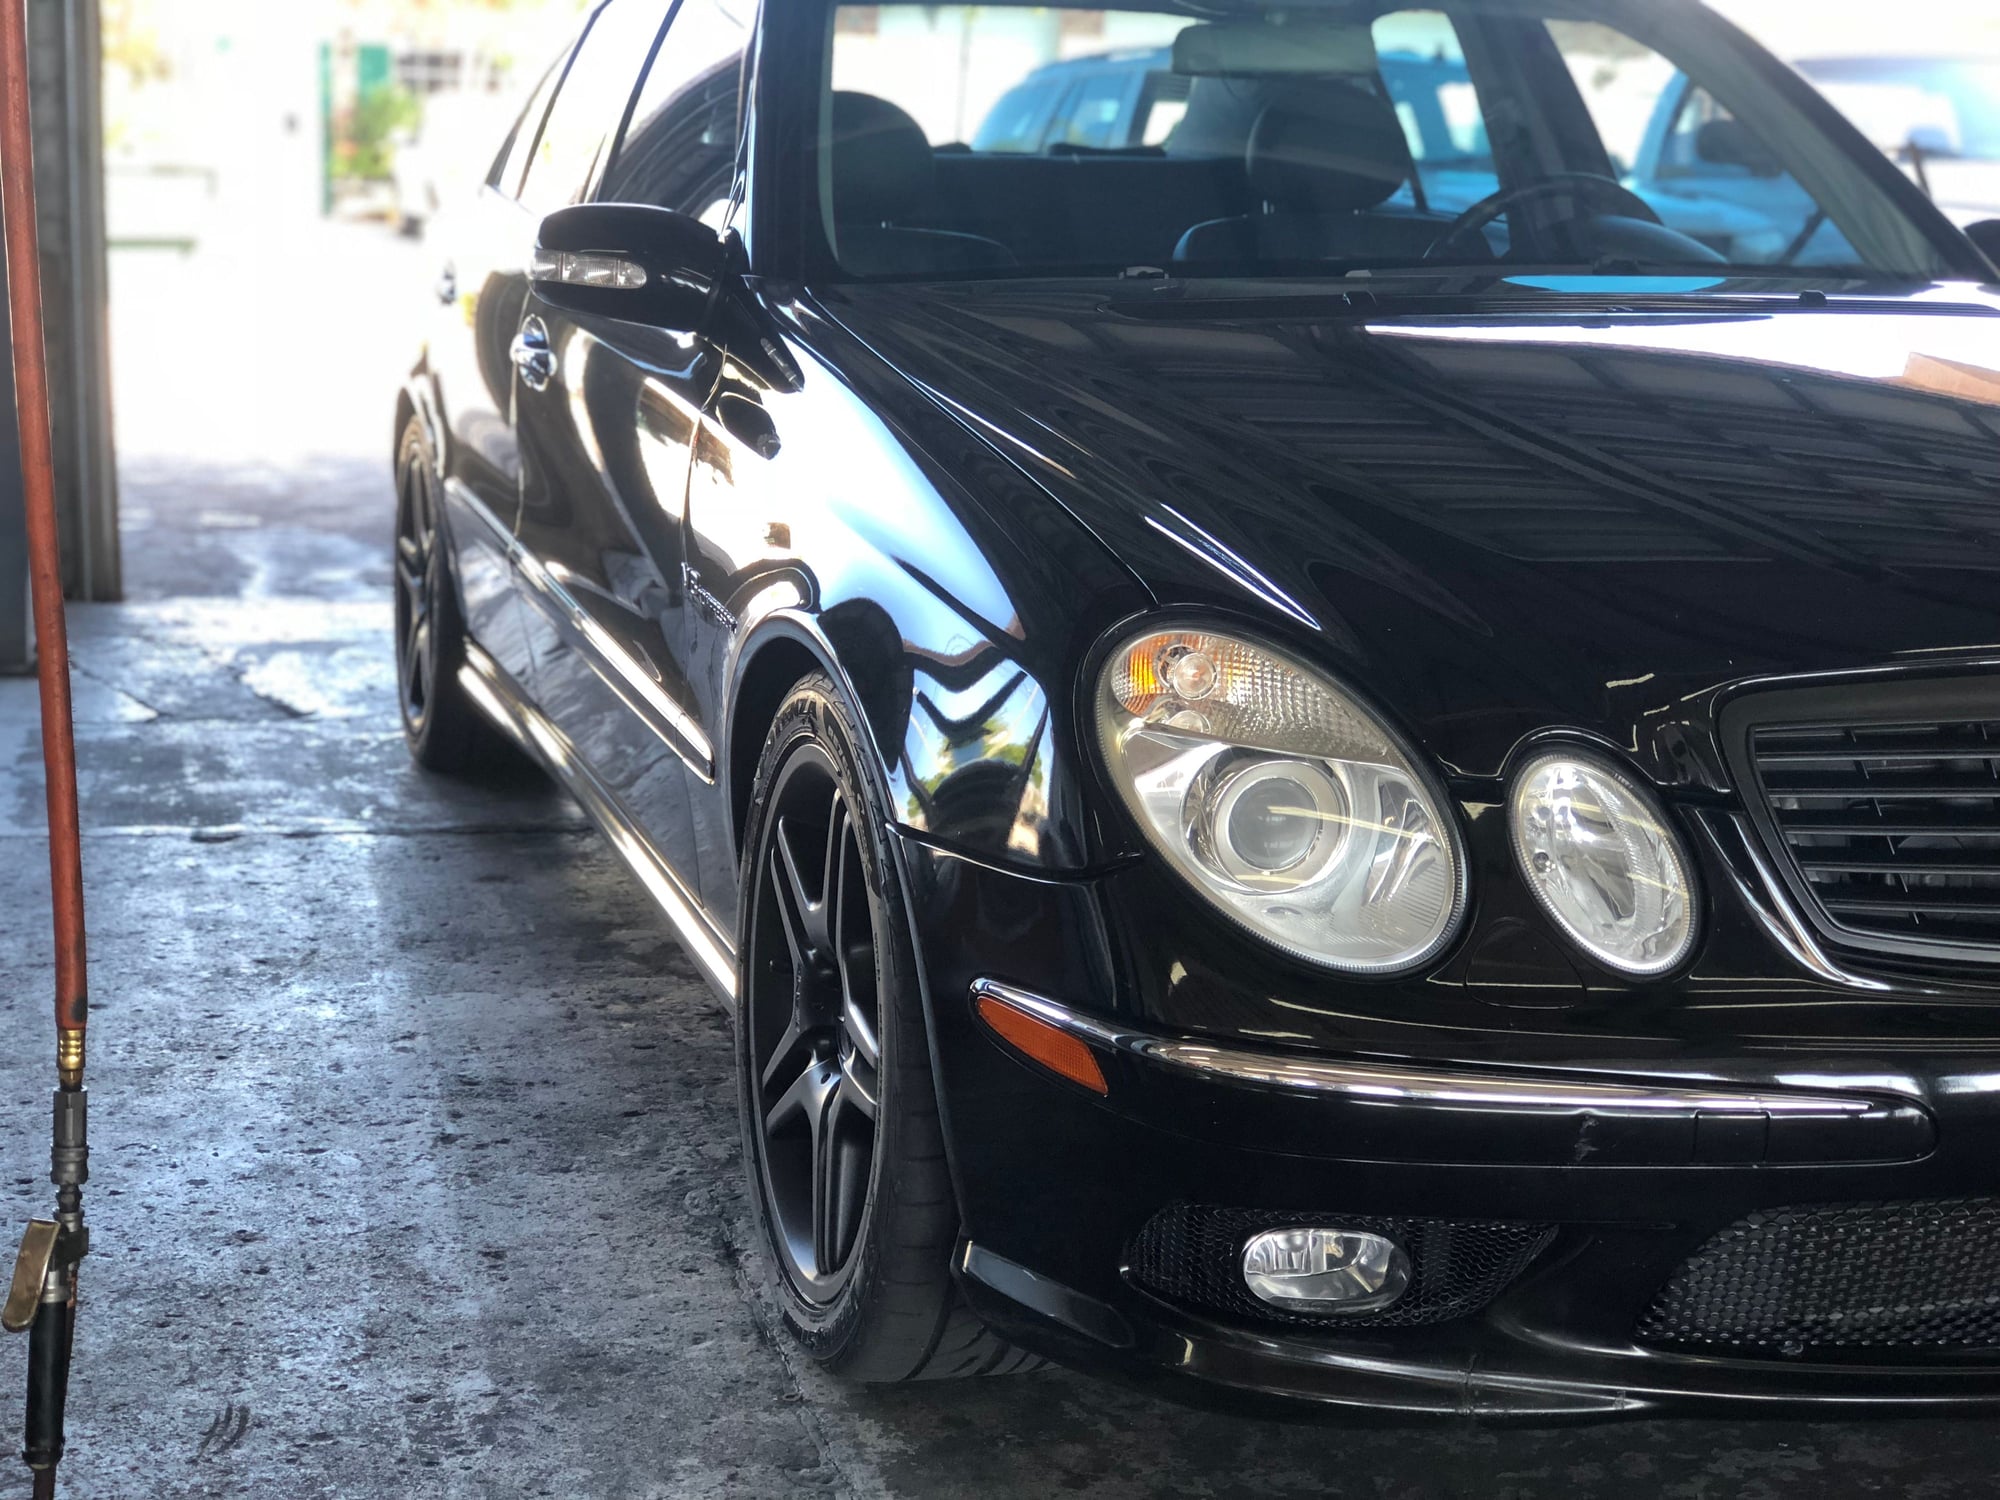 2003 Mercedes-Benz E55 AMG - 2003 E55 AMG 73500 Miles GREAT condition - Used - VIN WDBUF76J63A392990 - 75,300 Miles - 8 cyl - 2WD - Automatic - Sedan - Black - Boca Raton, FL 33434, United States